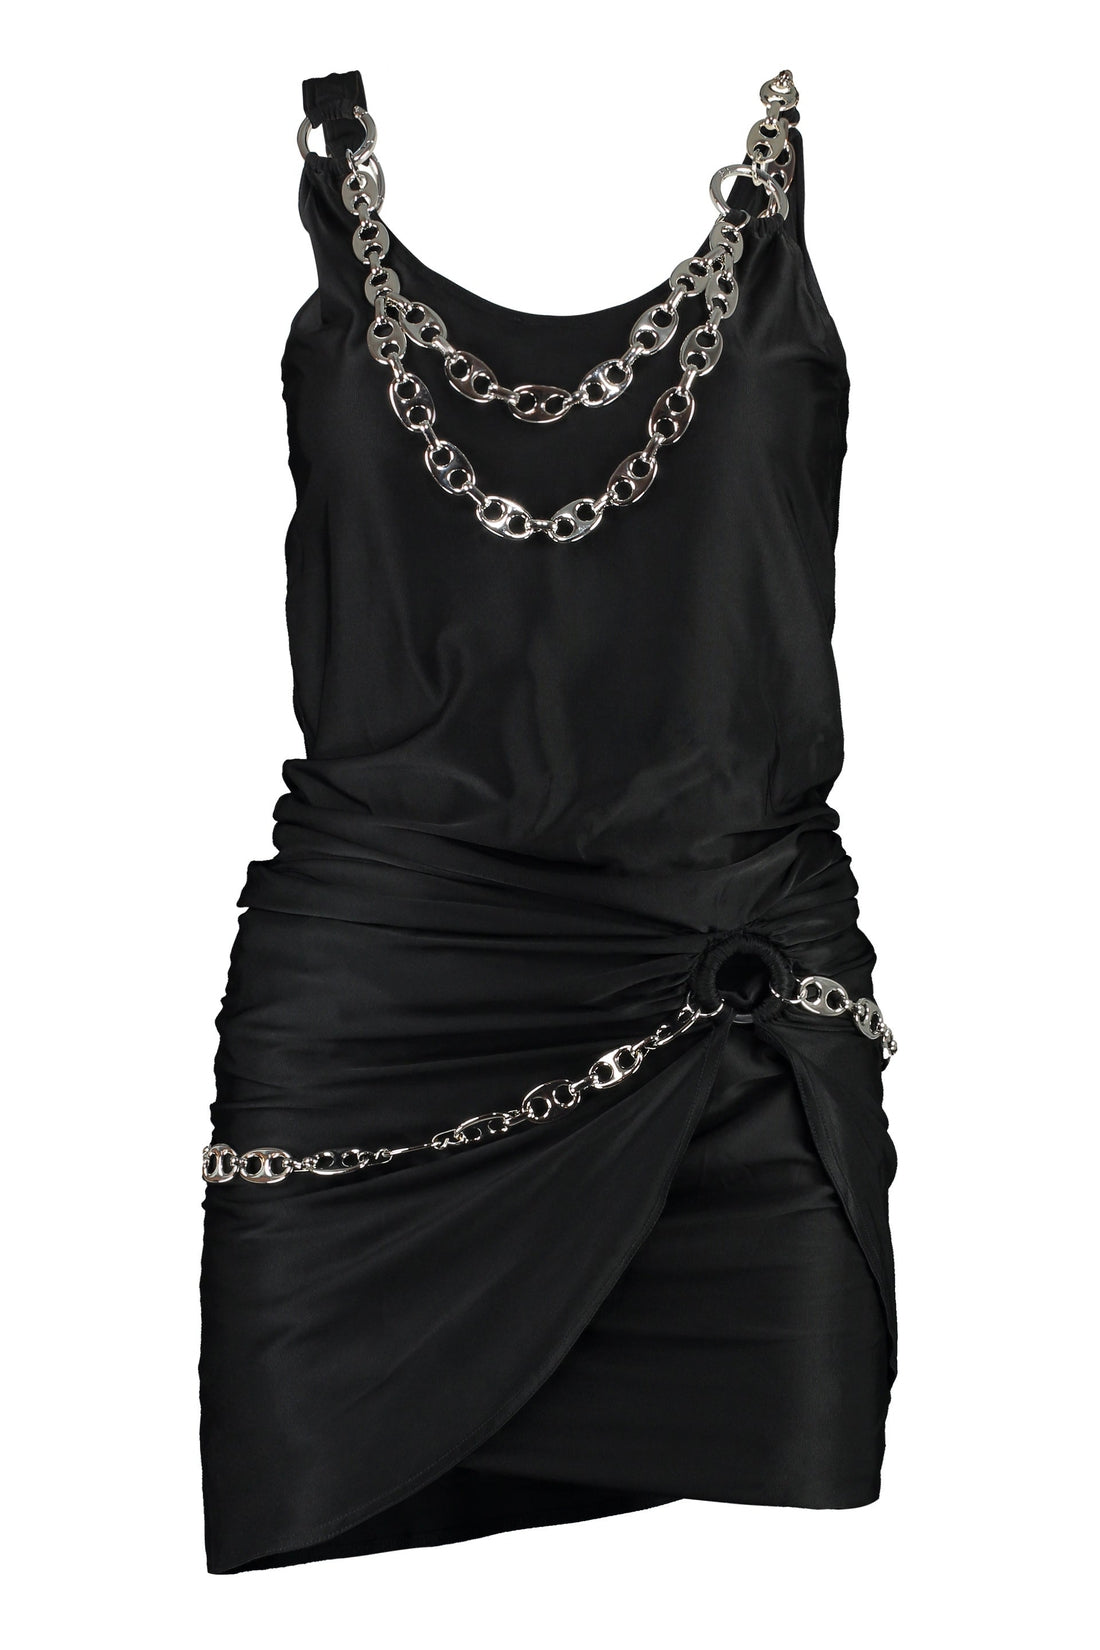 Paco Rabanne-OUTLET-SALE-Dress with chains-ARCHIVIST